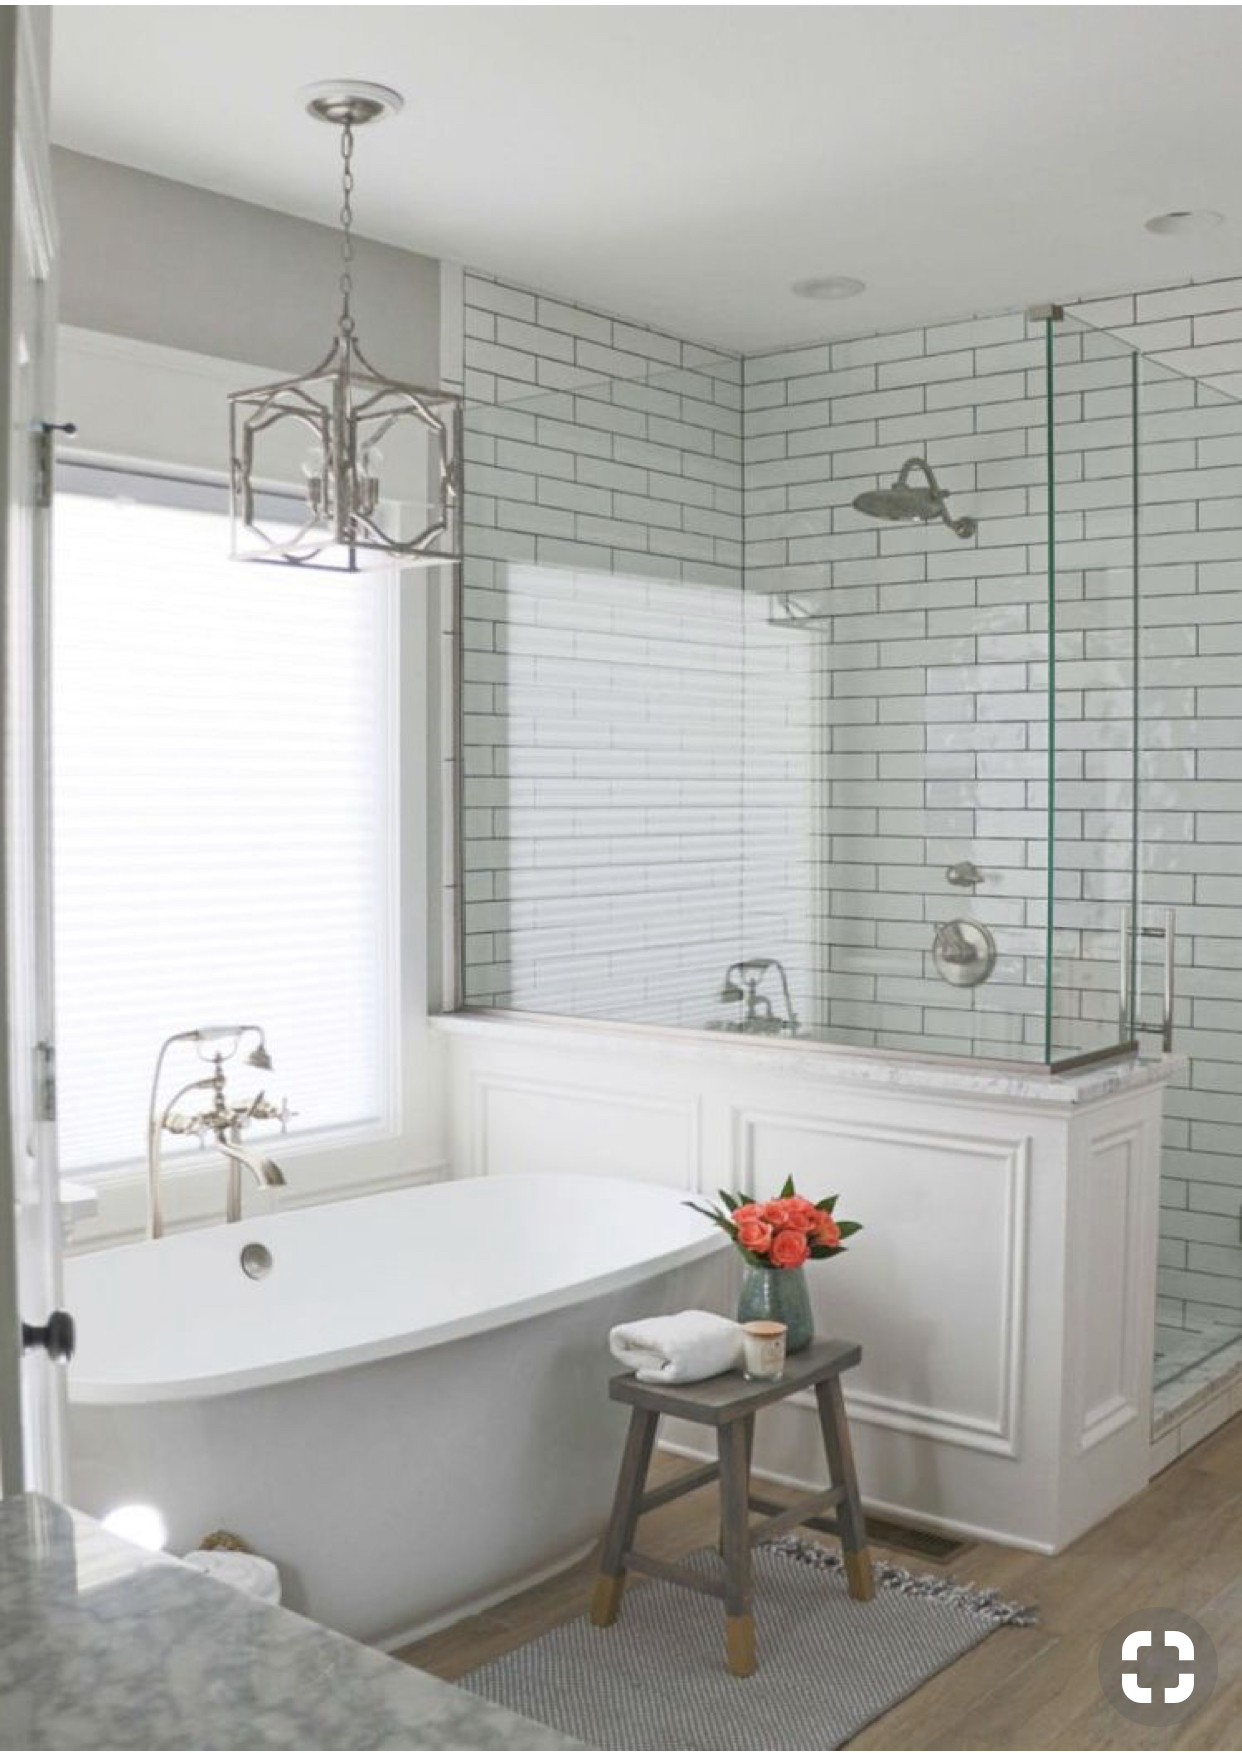  *Masterbath Inspiration: we will add a tub and I love the molding around the shower base here.&nbsp;